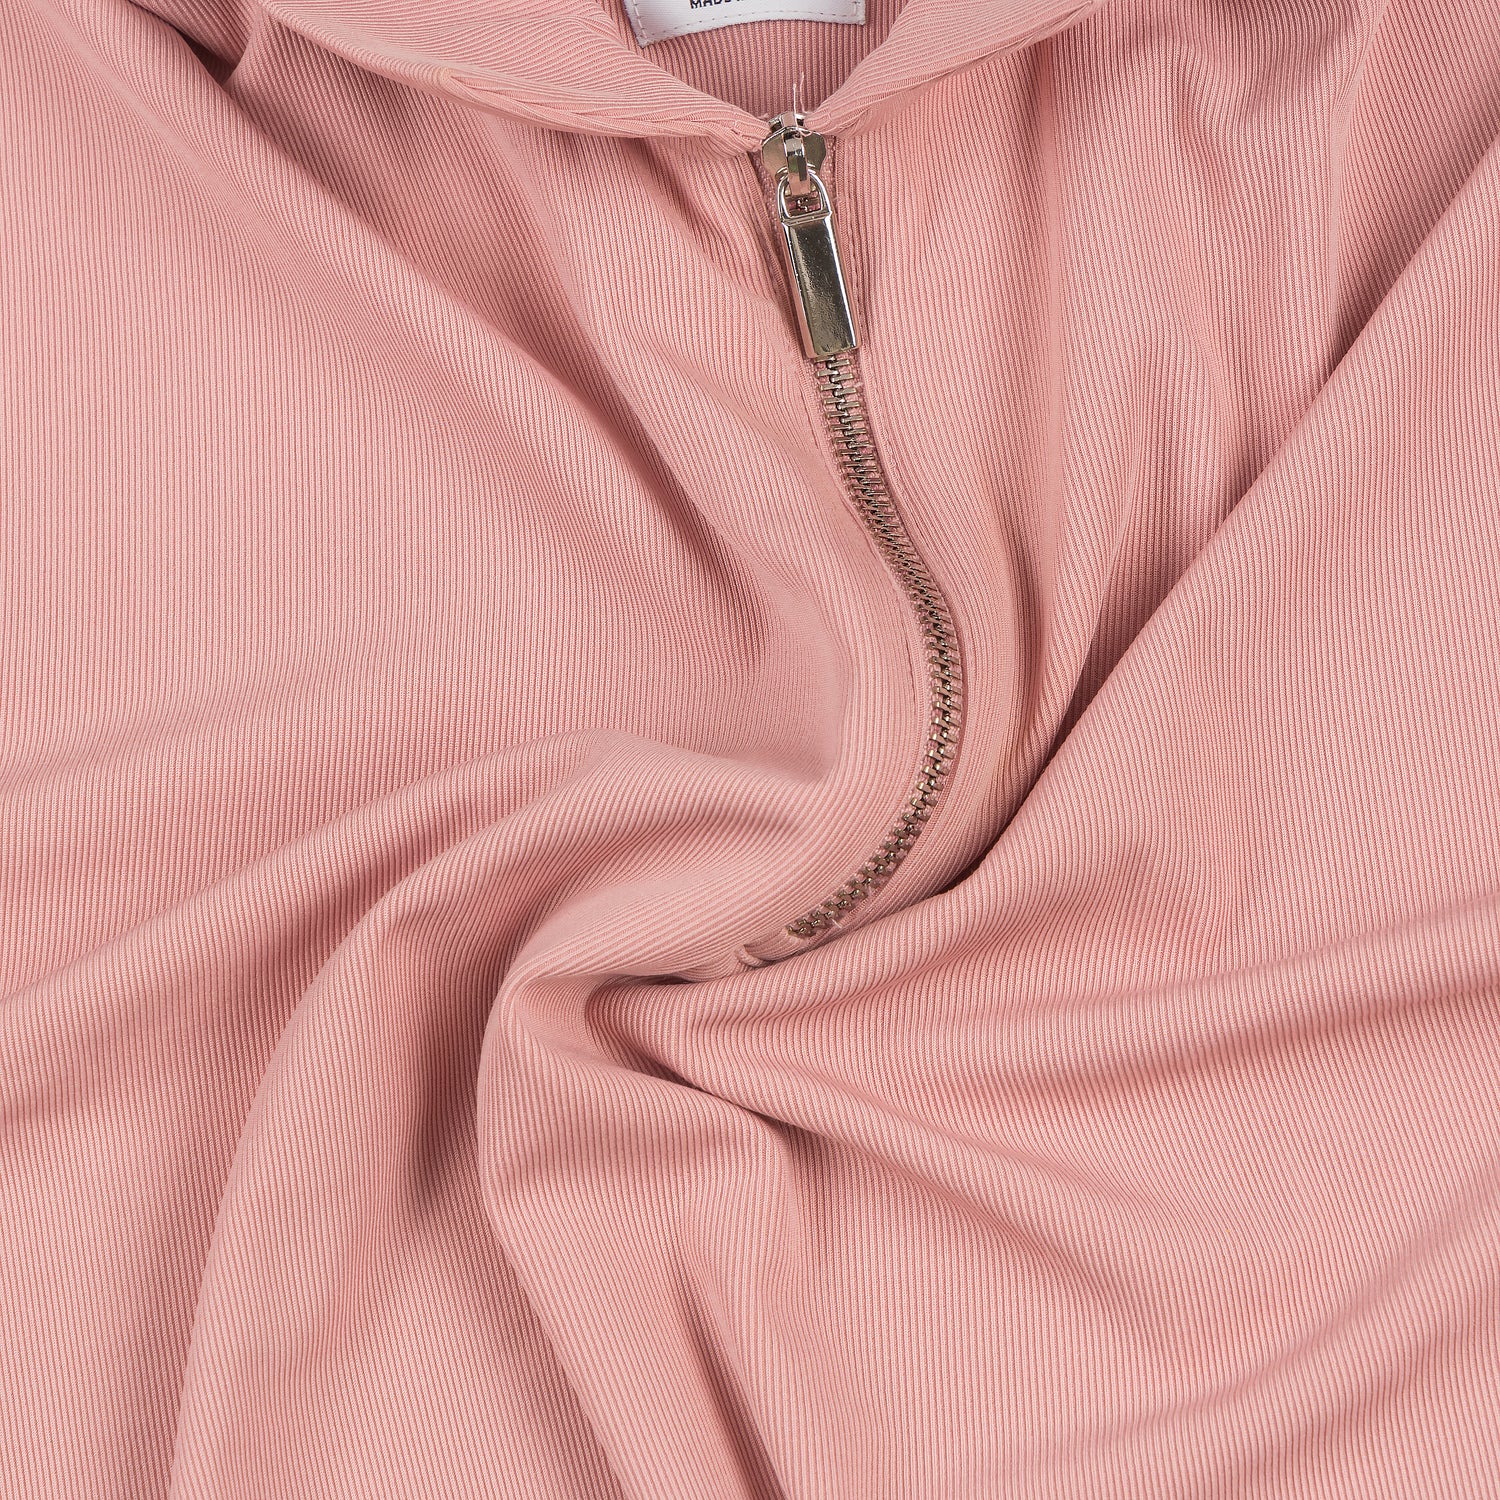 Opulent Solid Peach Half Sleeves Polo T-shirt